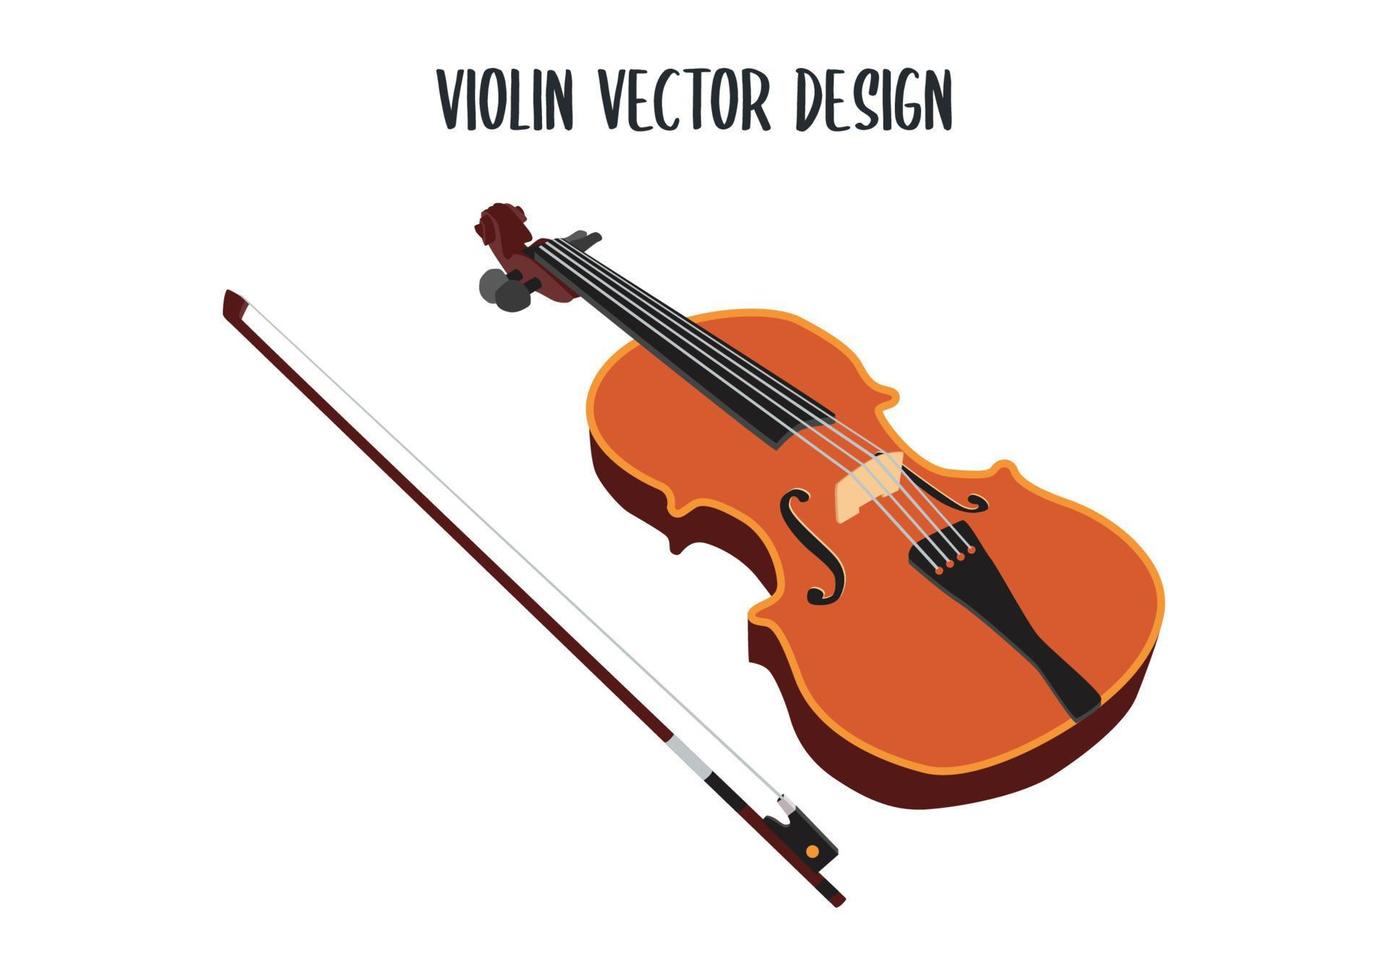 Wooden violin vector design. Classical violin vector illustration isolated on white background. Stringed musical instrument. Violin Clipart